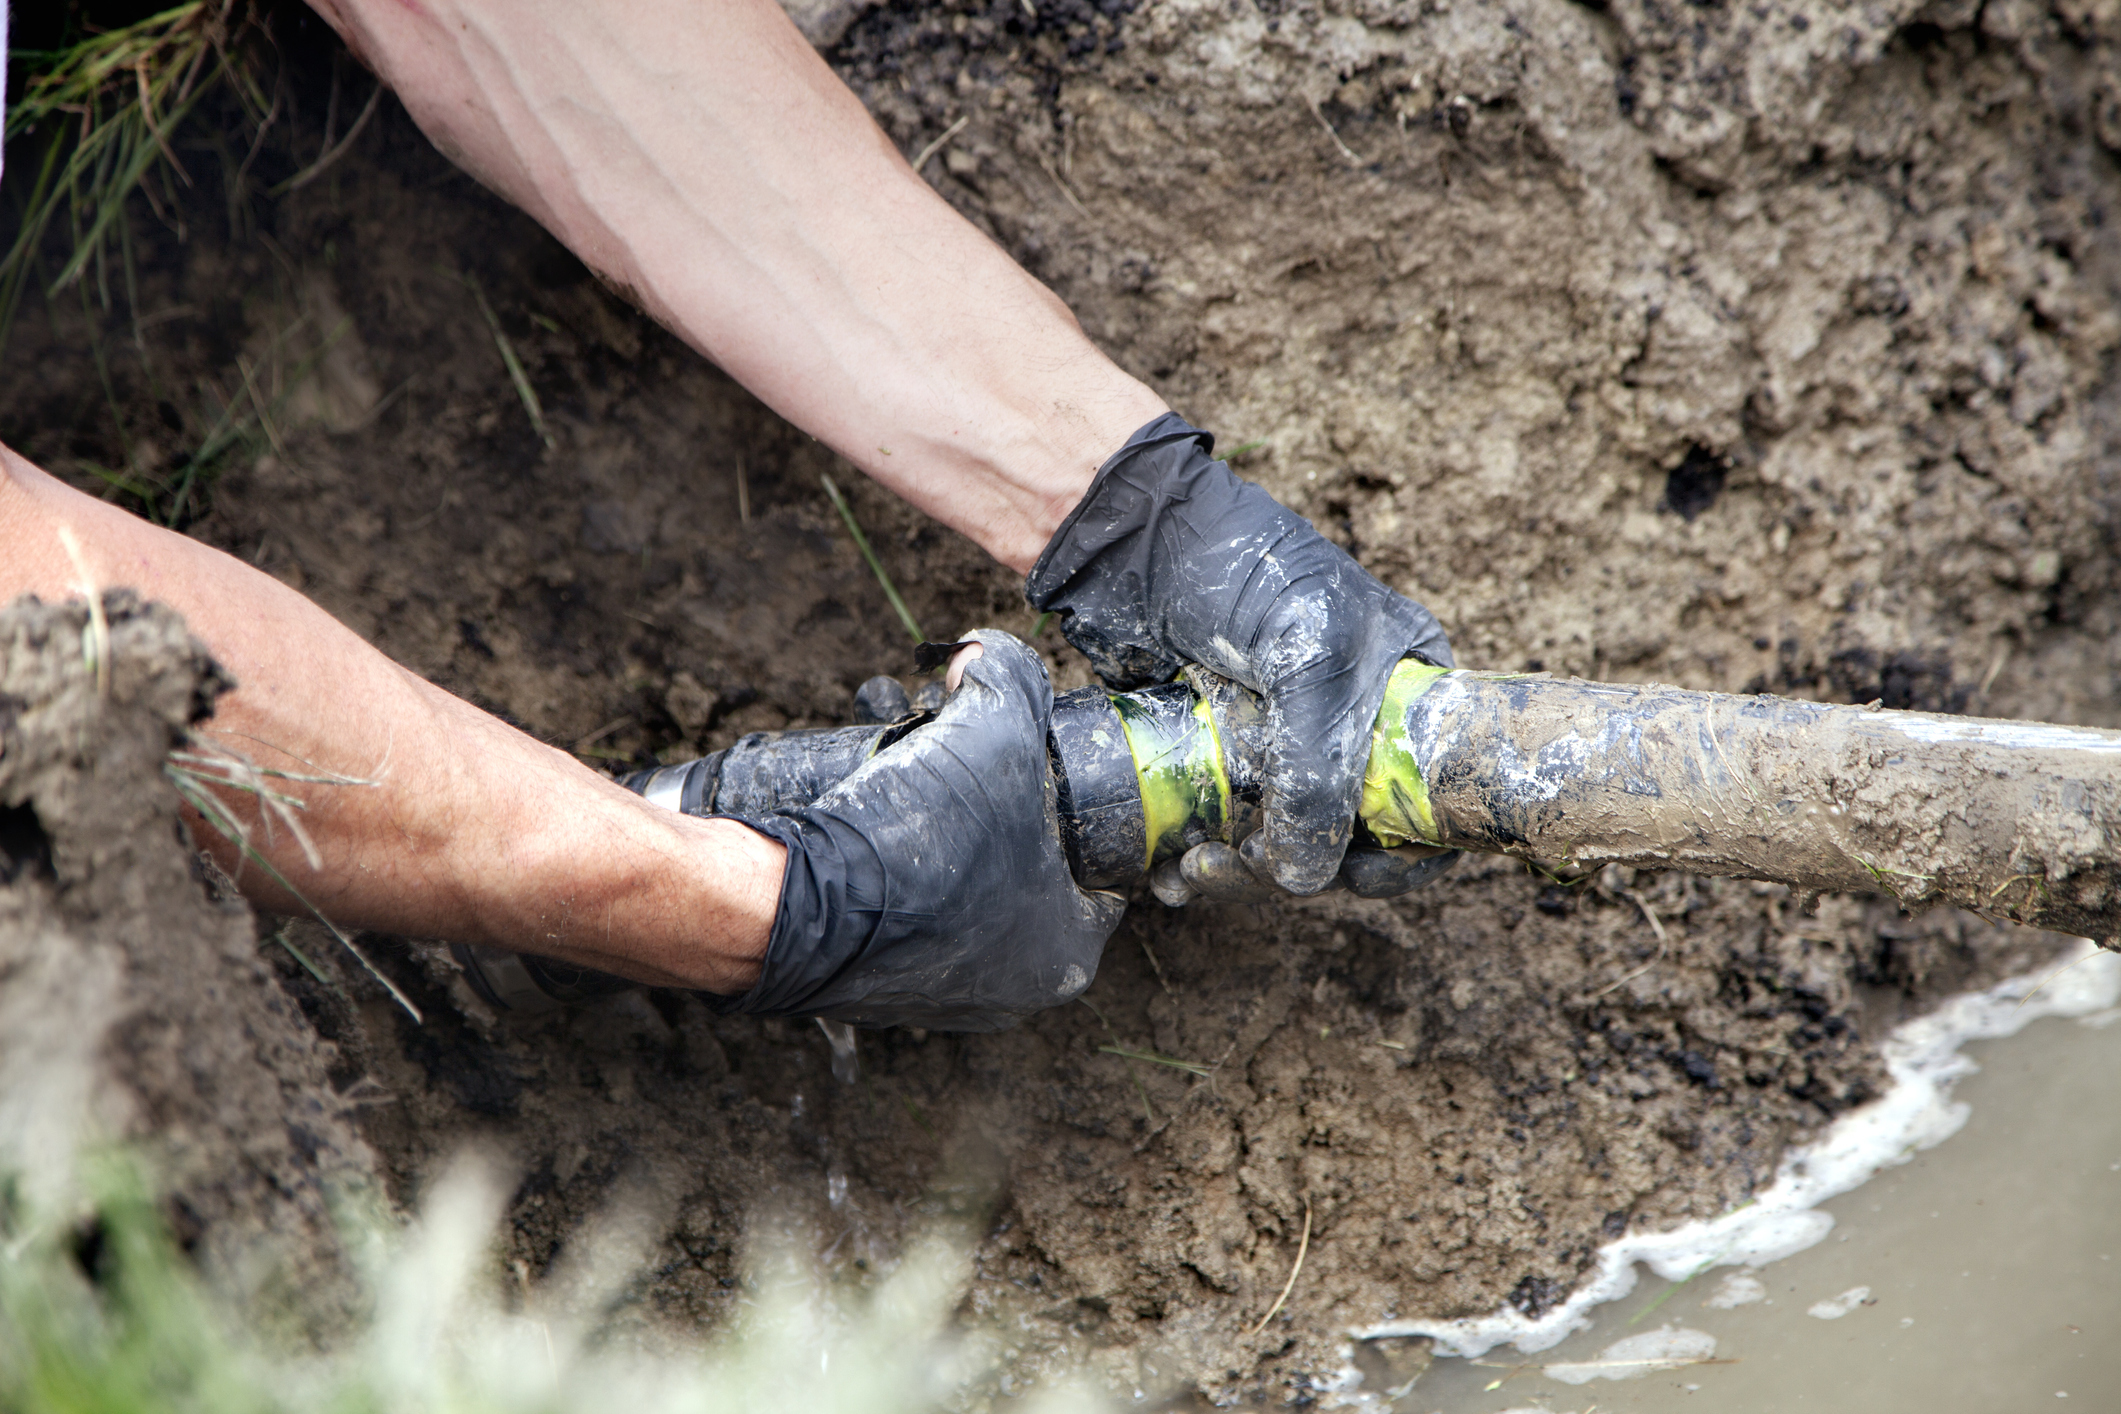  Plumbers hands on an outdoor sewer pipe in mud